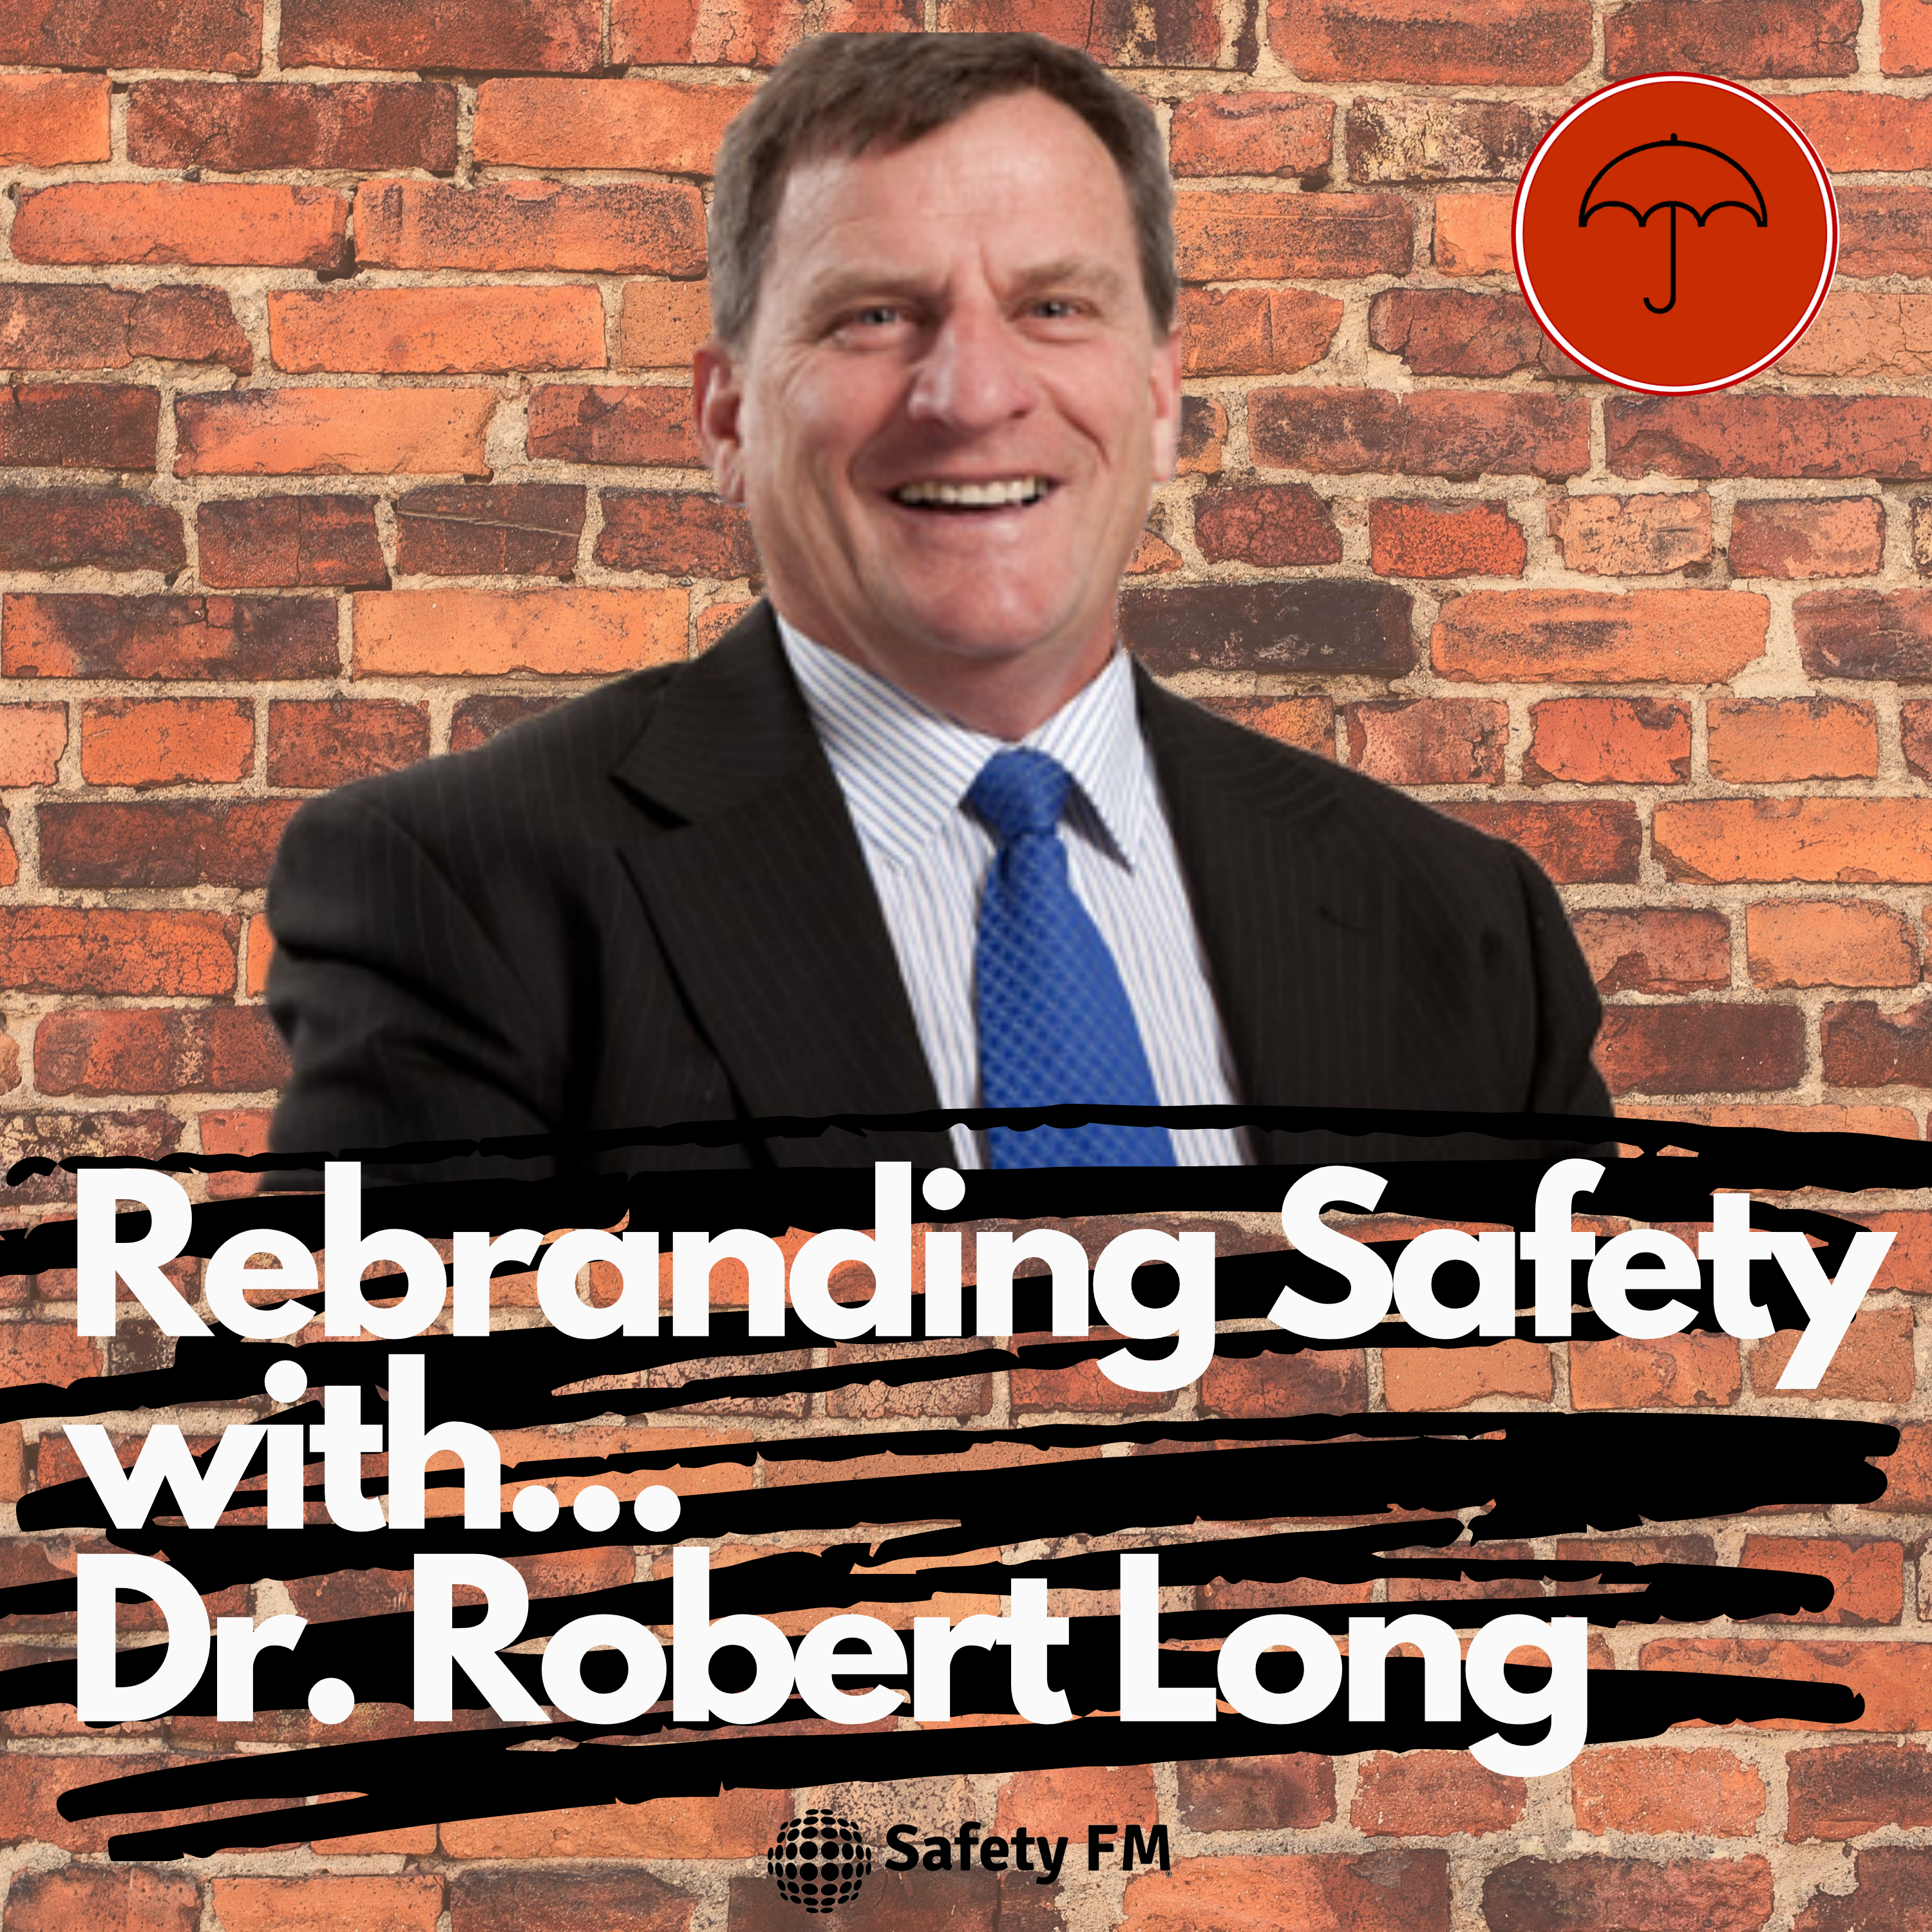 Rebranding Safety with Dr. Robert Long